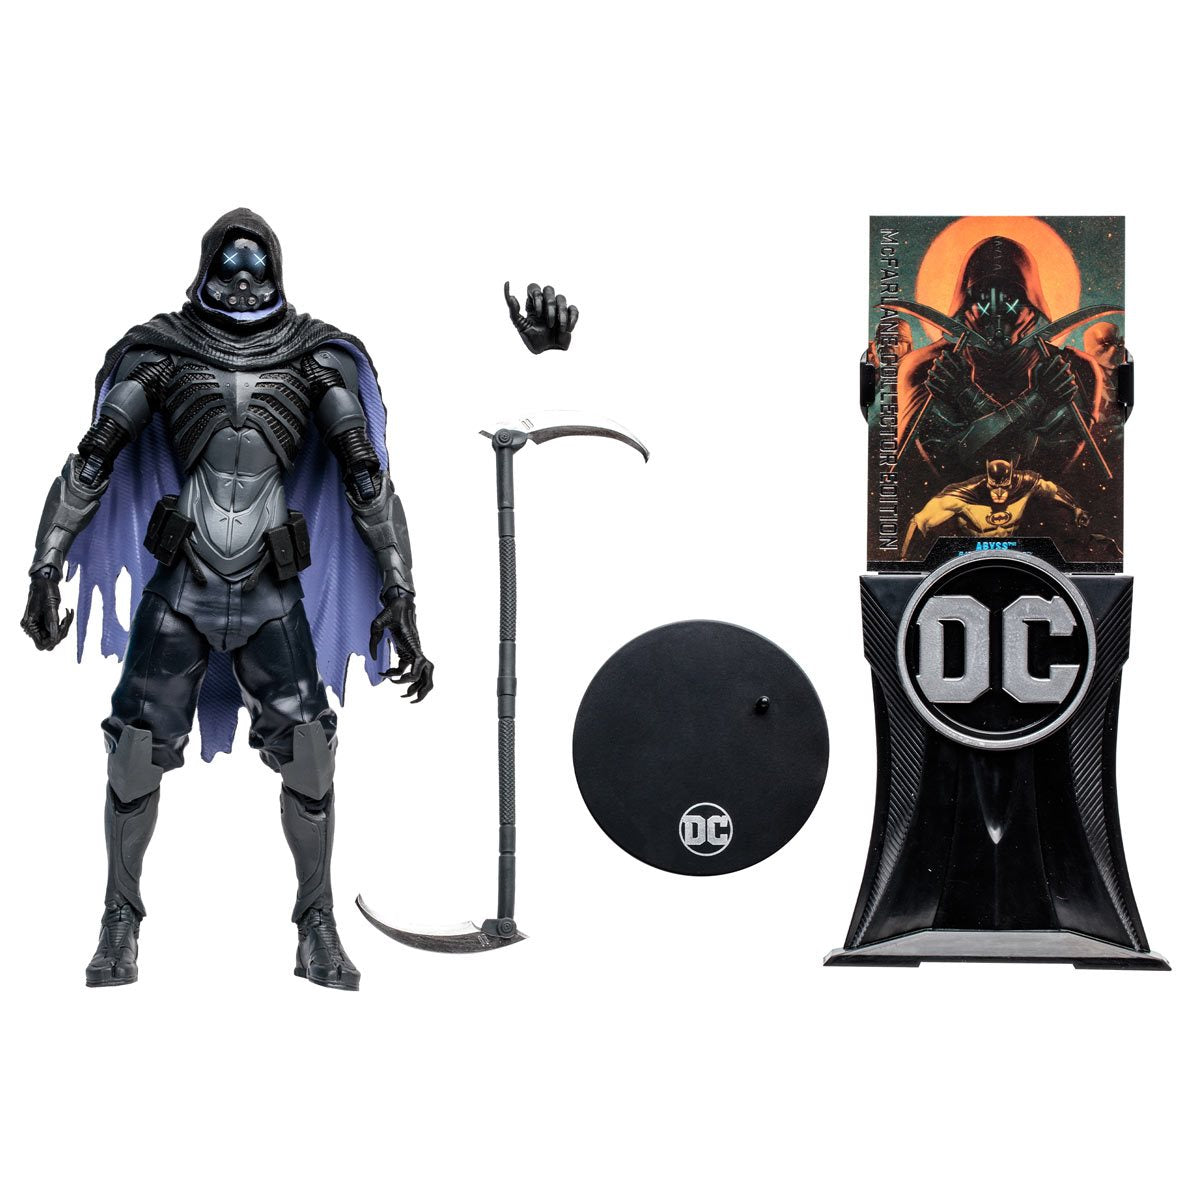 Abyss Batman vs. Abyss 7-Inch Scale Action Figure with accessories - Heretoserveyou